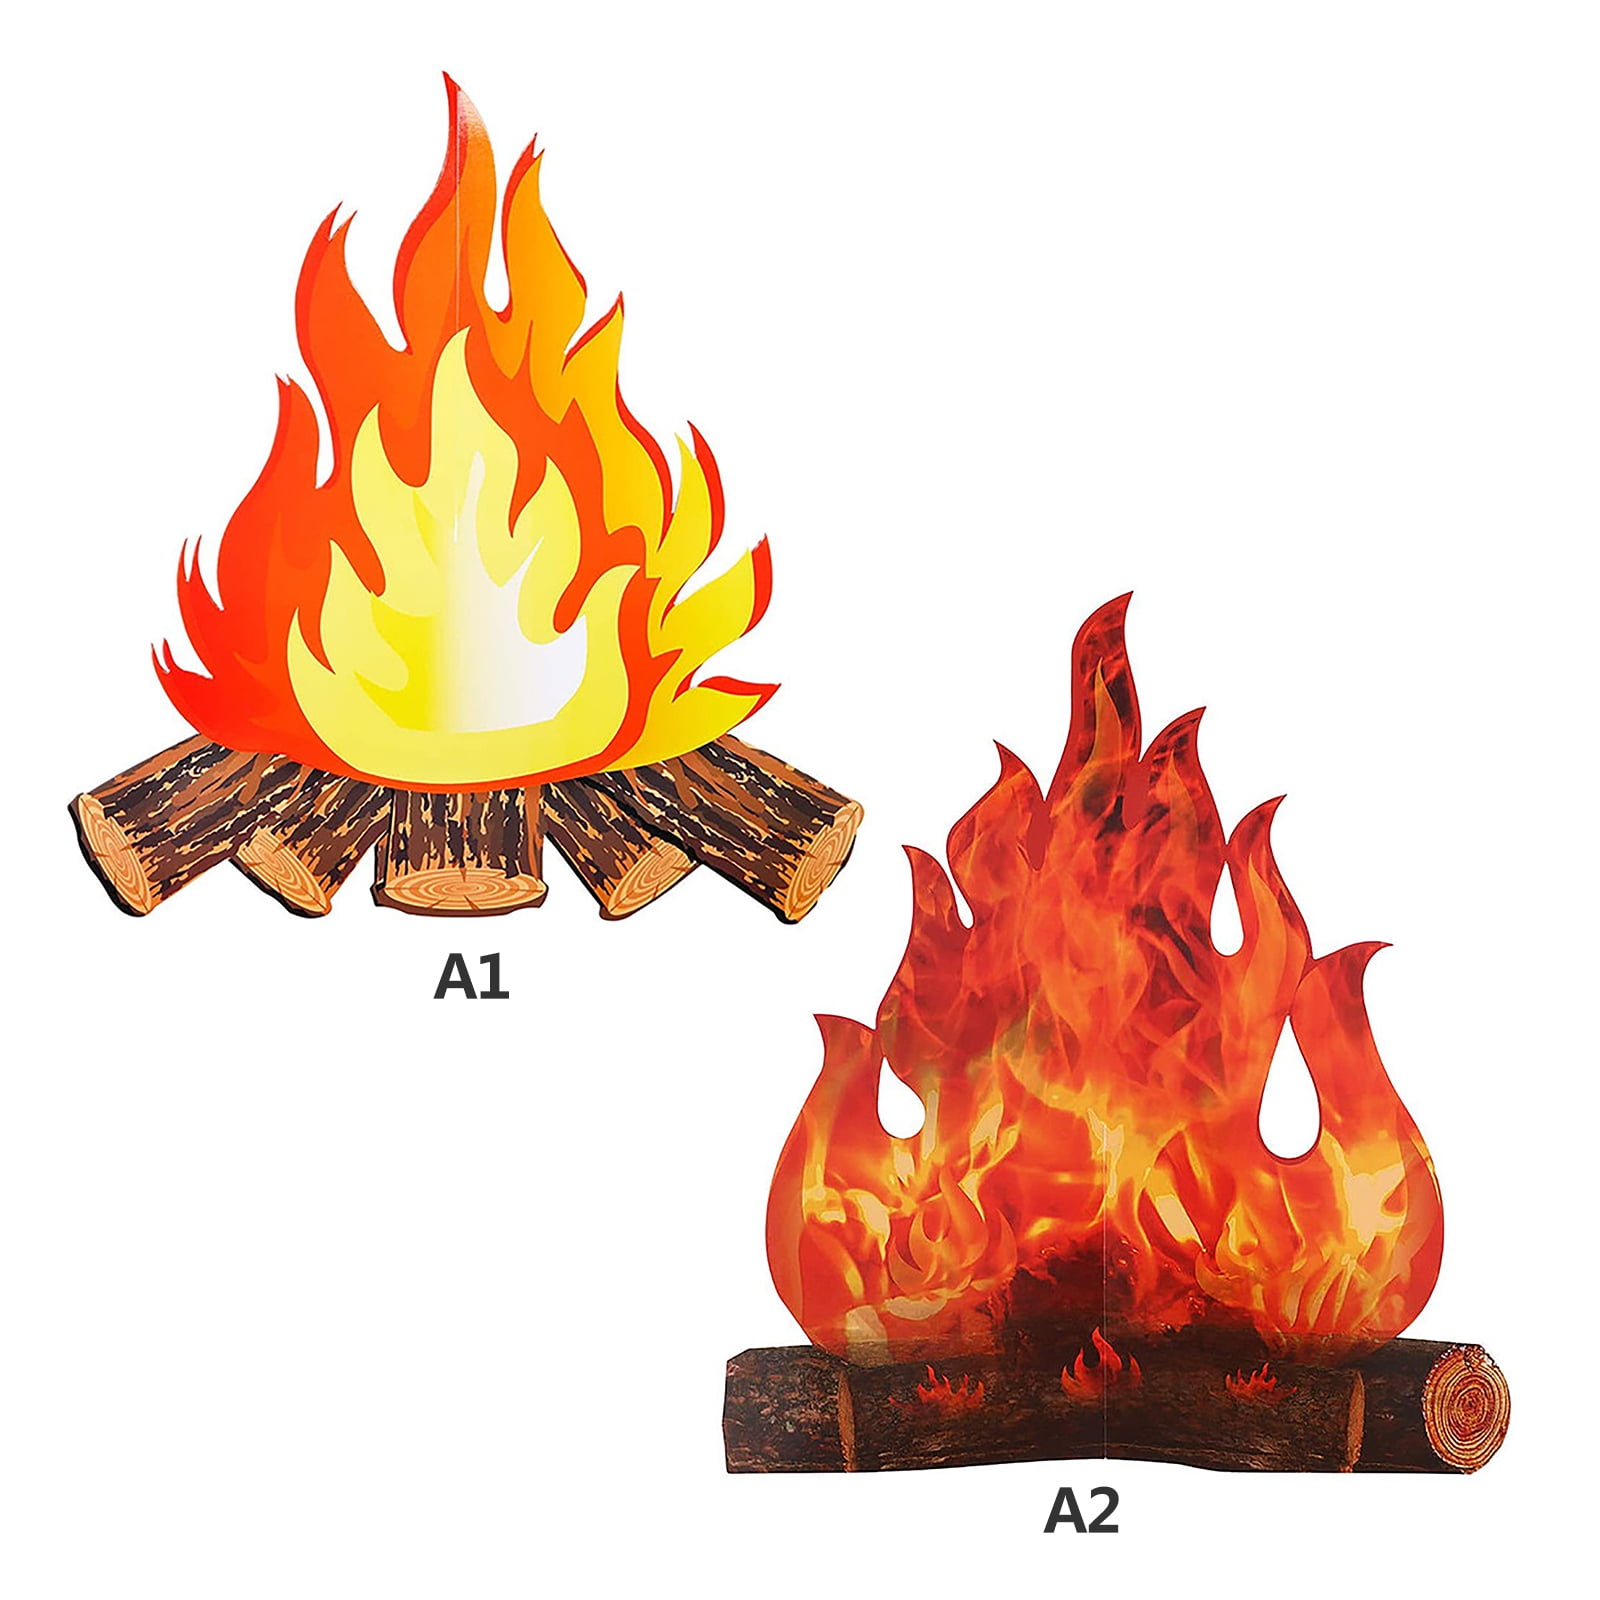 12 Inch Tall Artificial Fire Fake Flame Paper 3D Decorative Cardboard Campfire Centerpiece Flame Torch for Campfire Party Decorations 3 Set Style A 